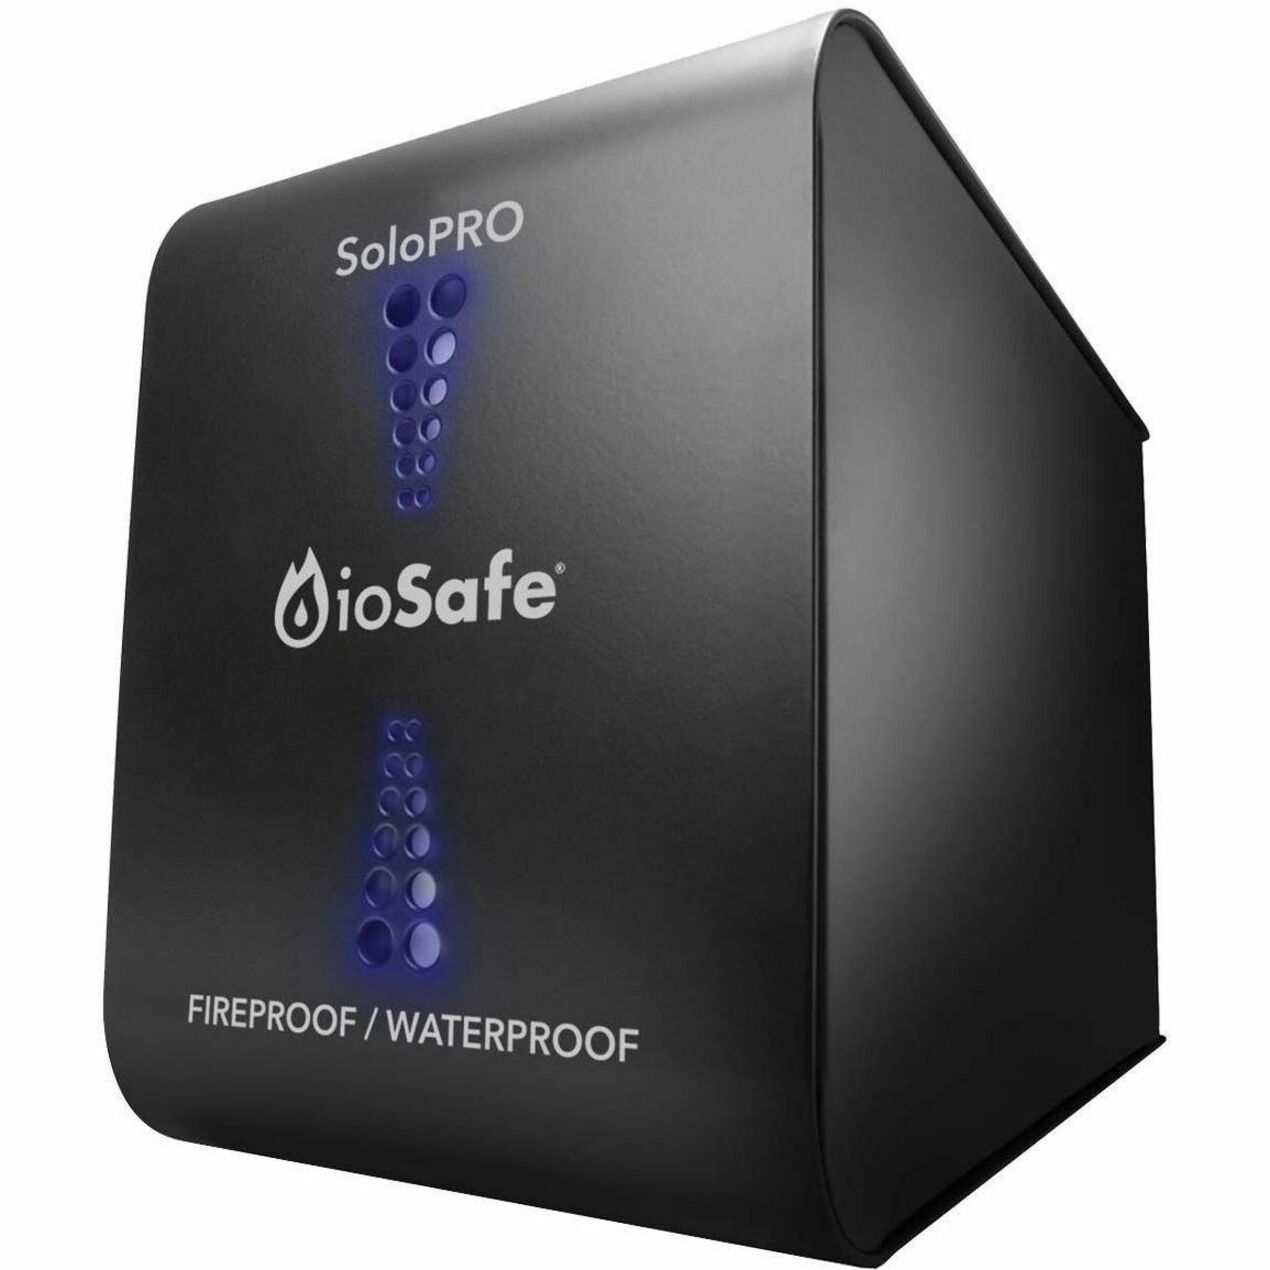 ioSafe SoloPRO External Hard Drive - 2 TB Storage Capacity [Discontinued]